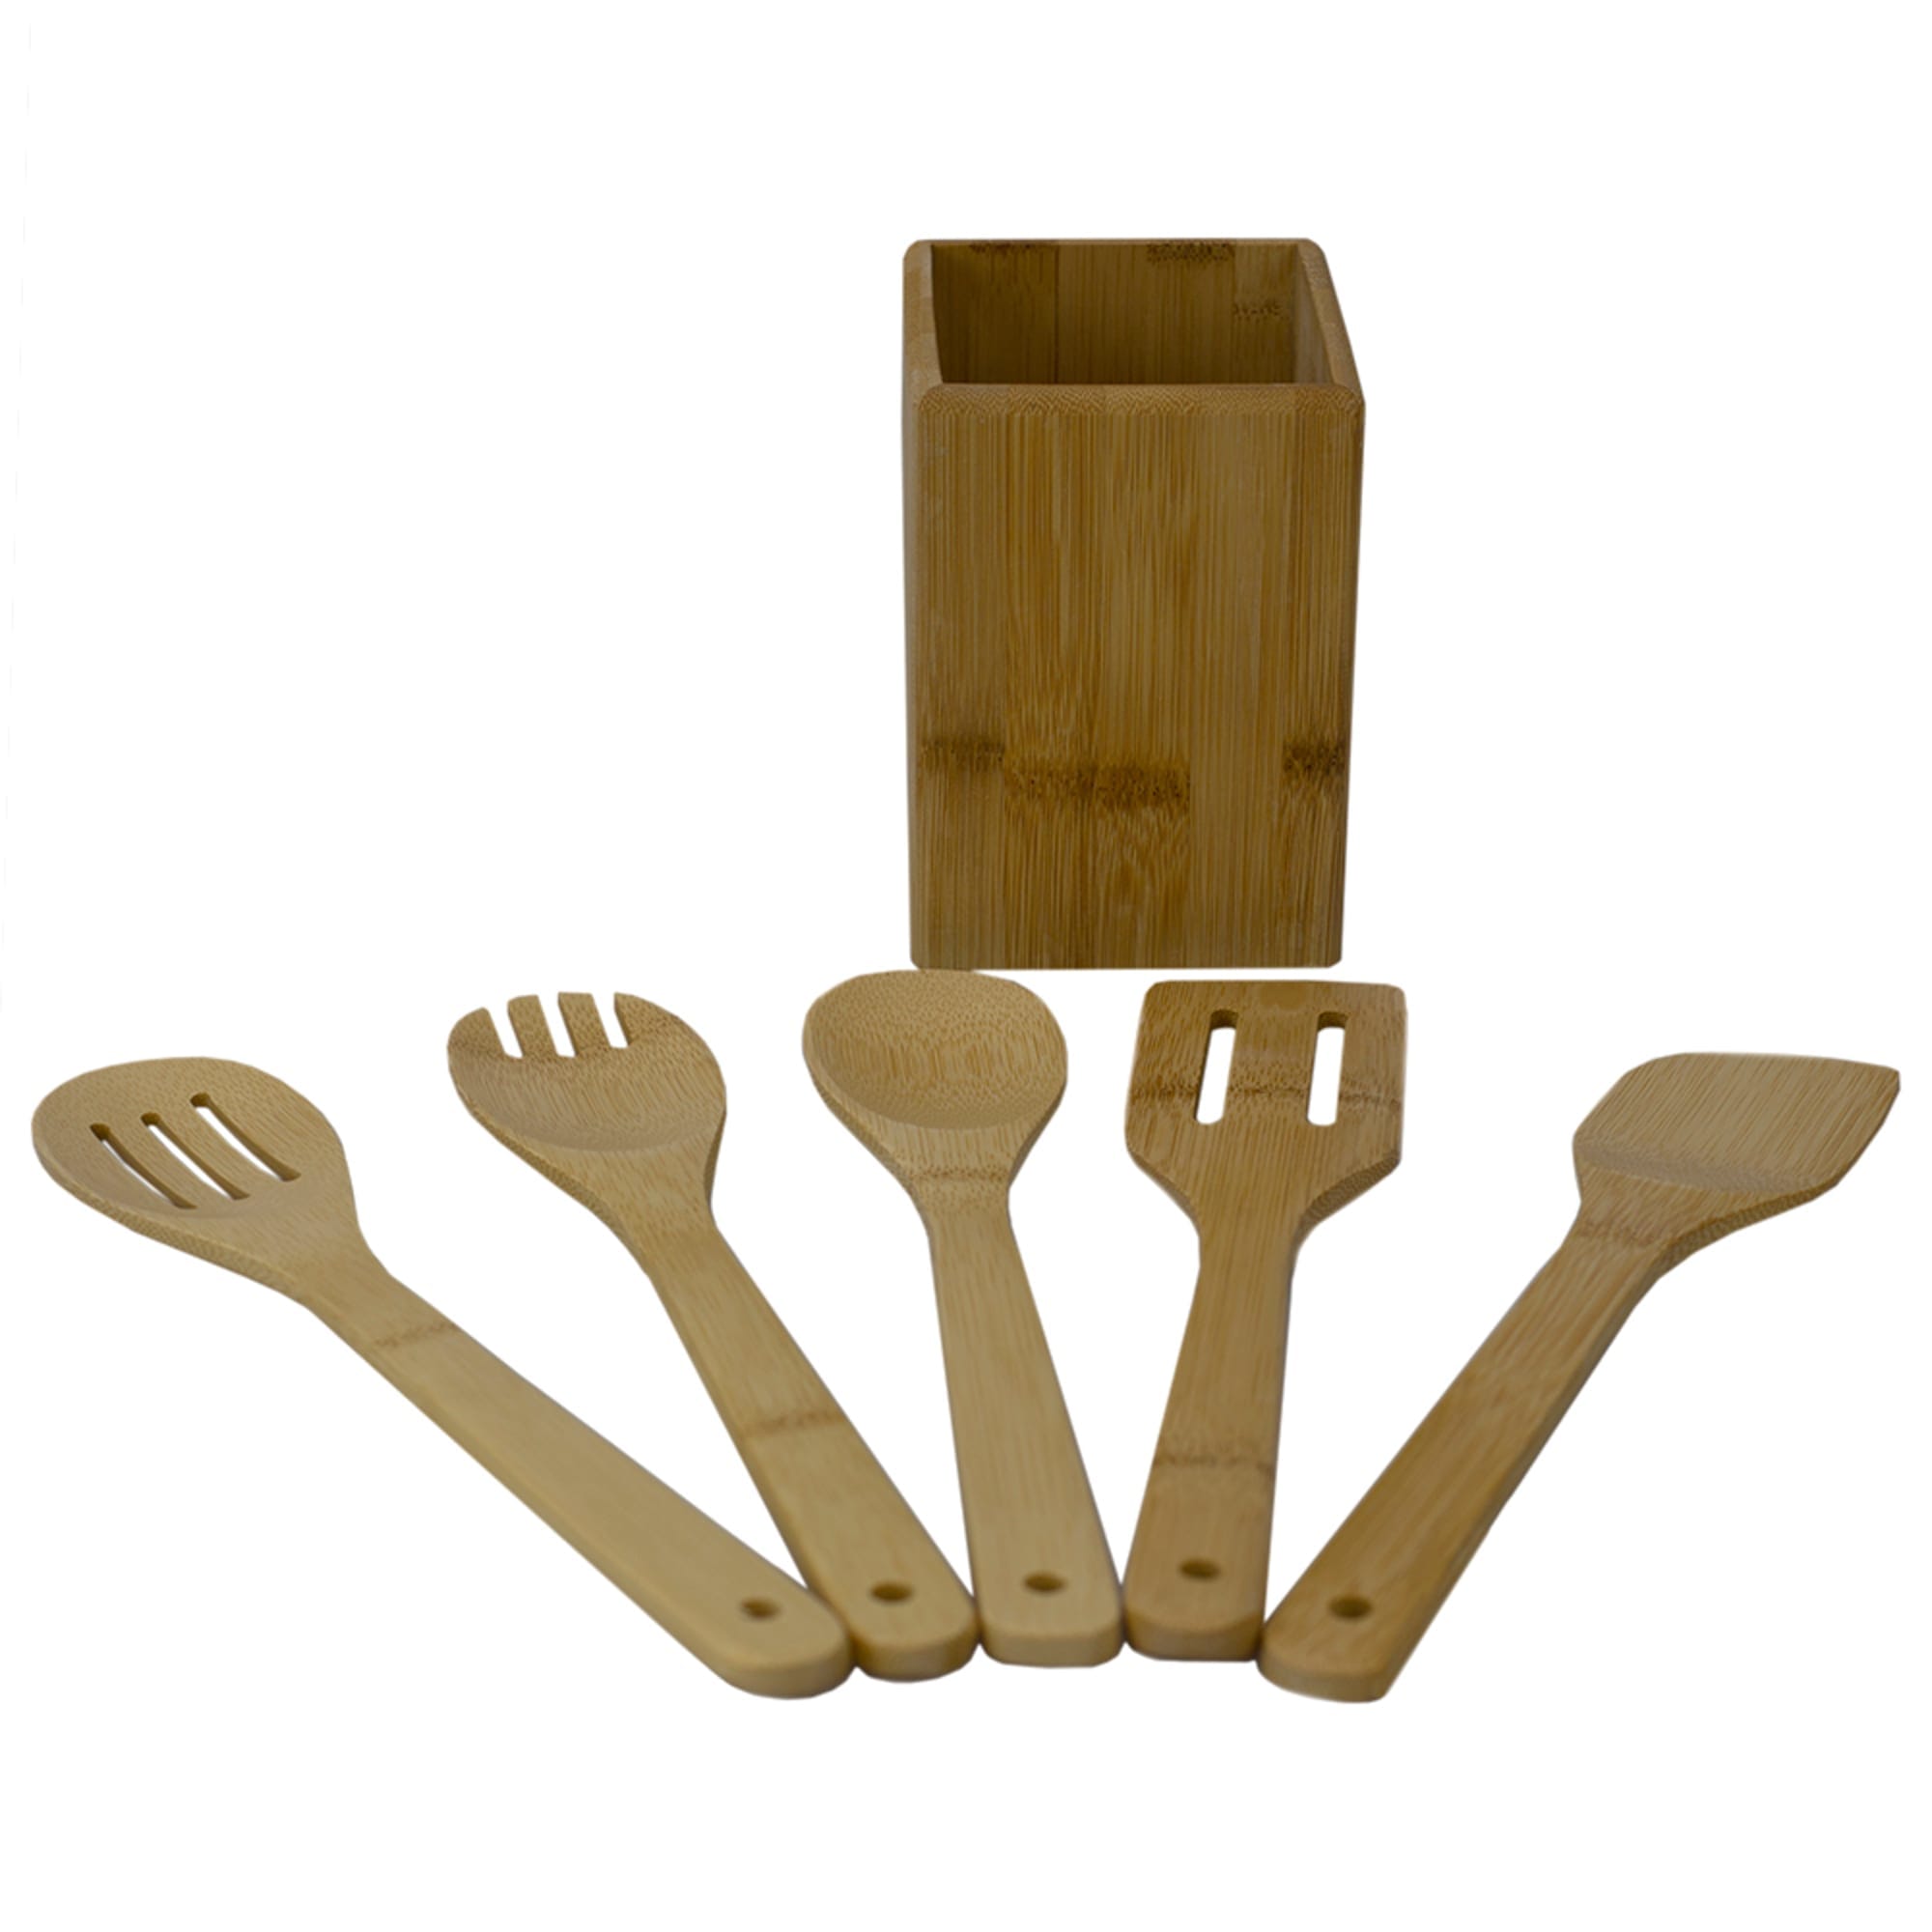 Home Basics 5 Piece Bamboo Utensils with Holder, Natural $8.00 EACH, CASE PACK OF 12